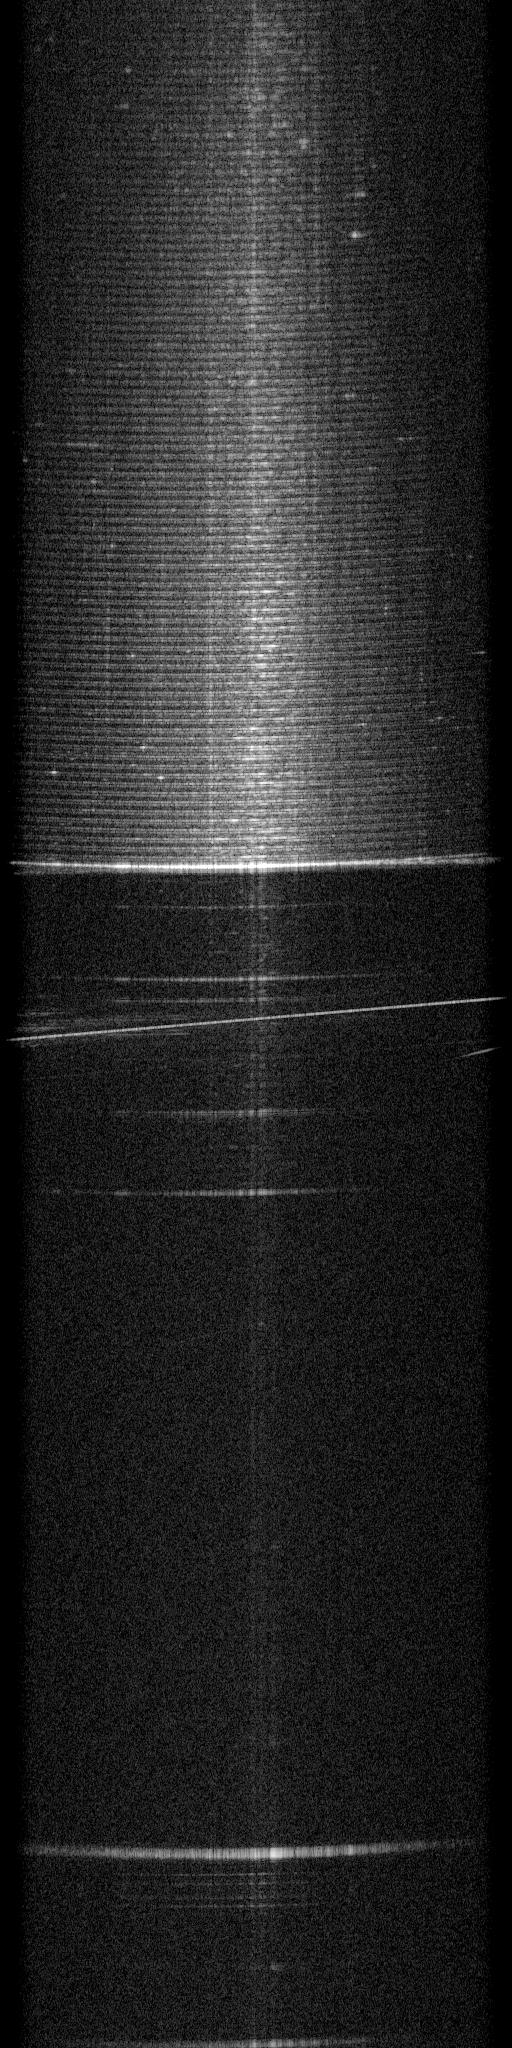 4 Results and discussion 4.1 Efficient suppression of coherent noise and full-range imaging Generally, Fourier-domain OCT images of scotch tape layers show coherent noise.